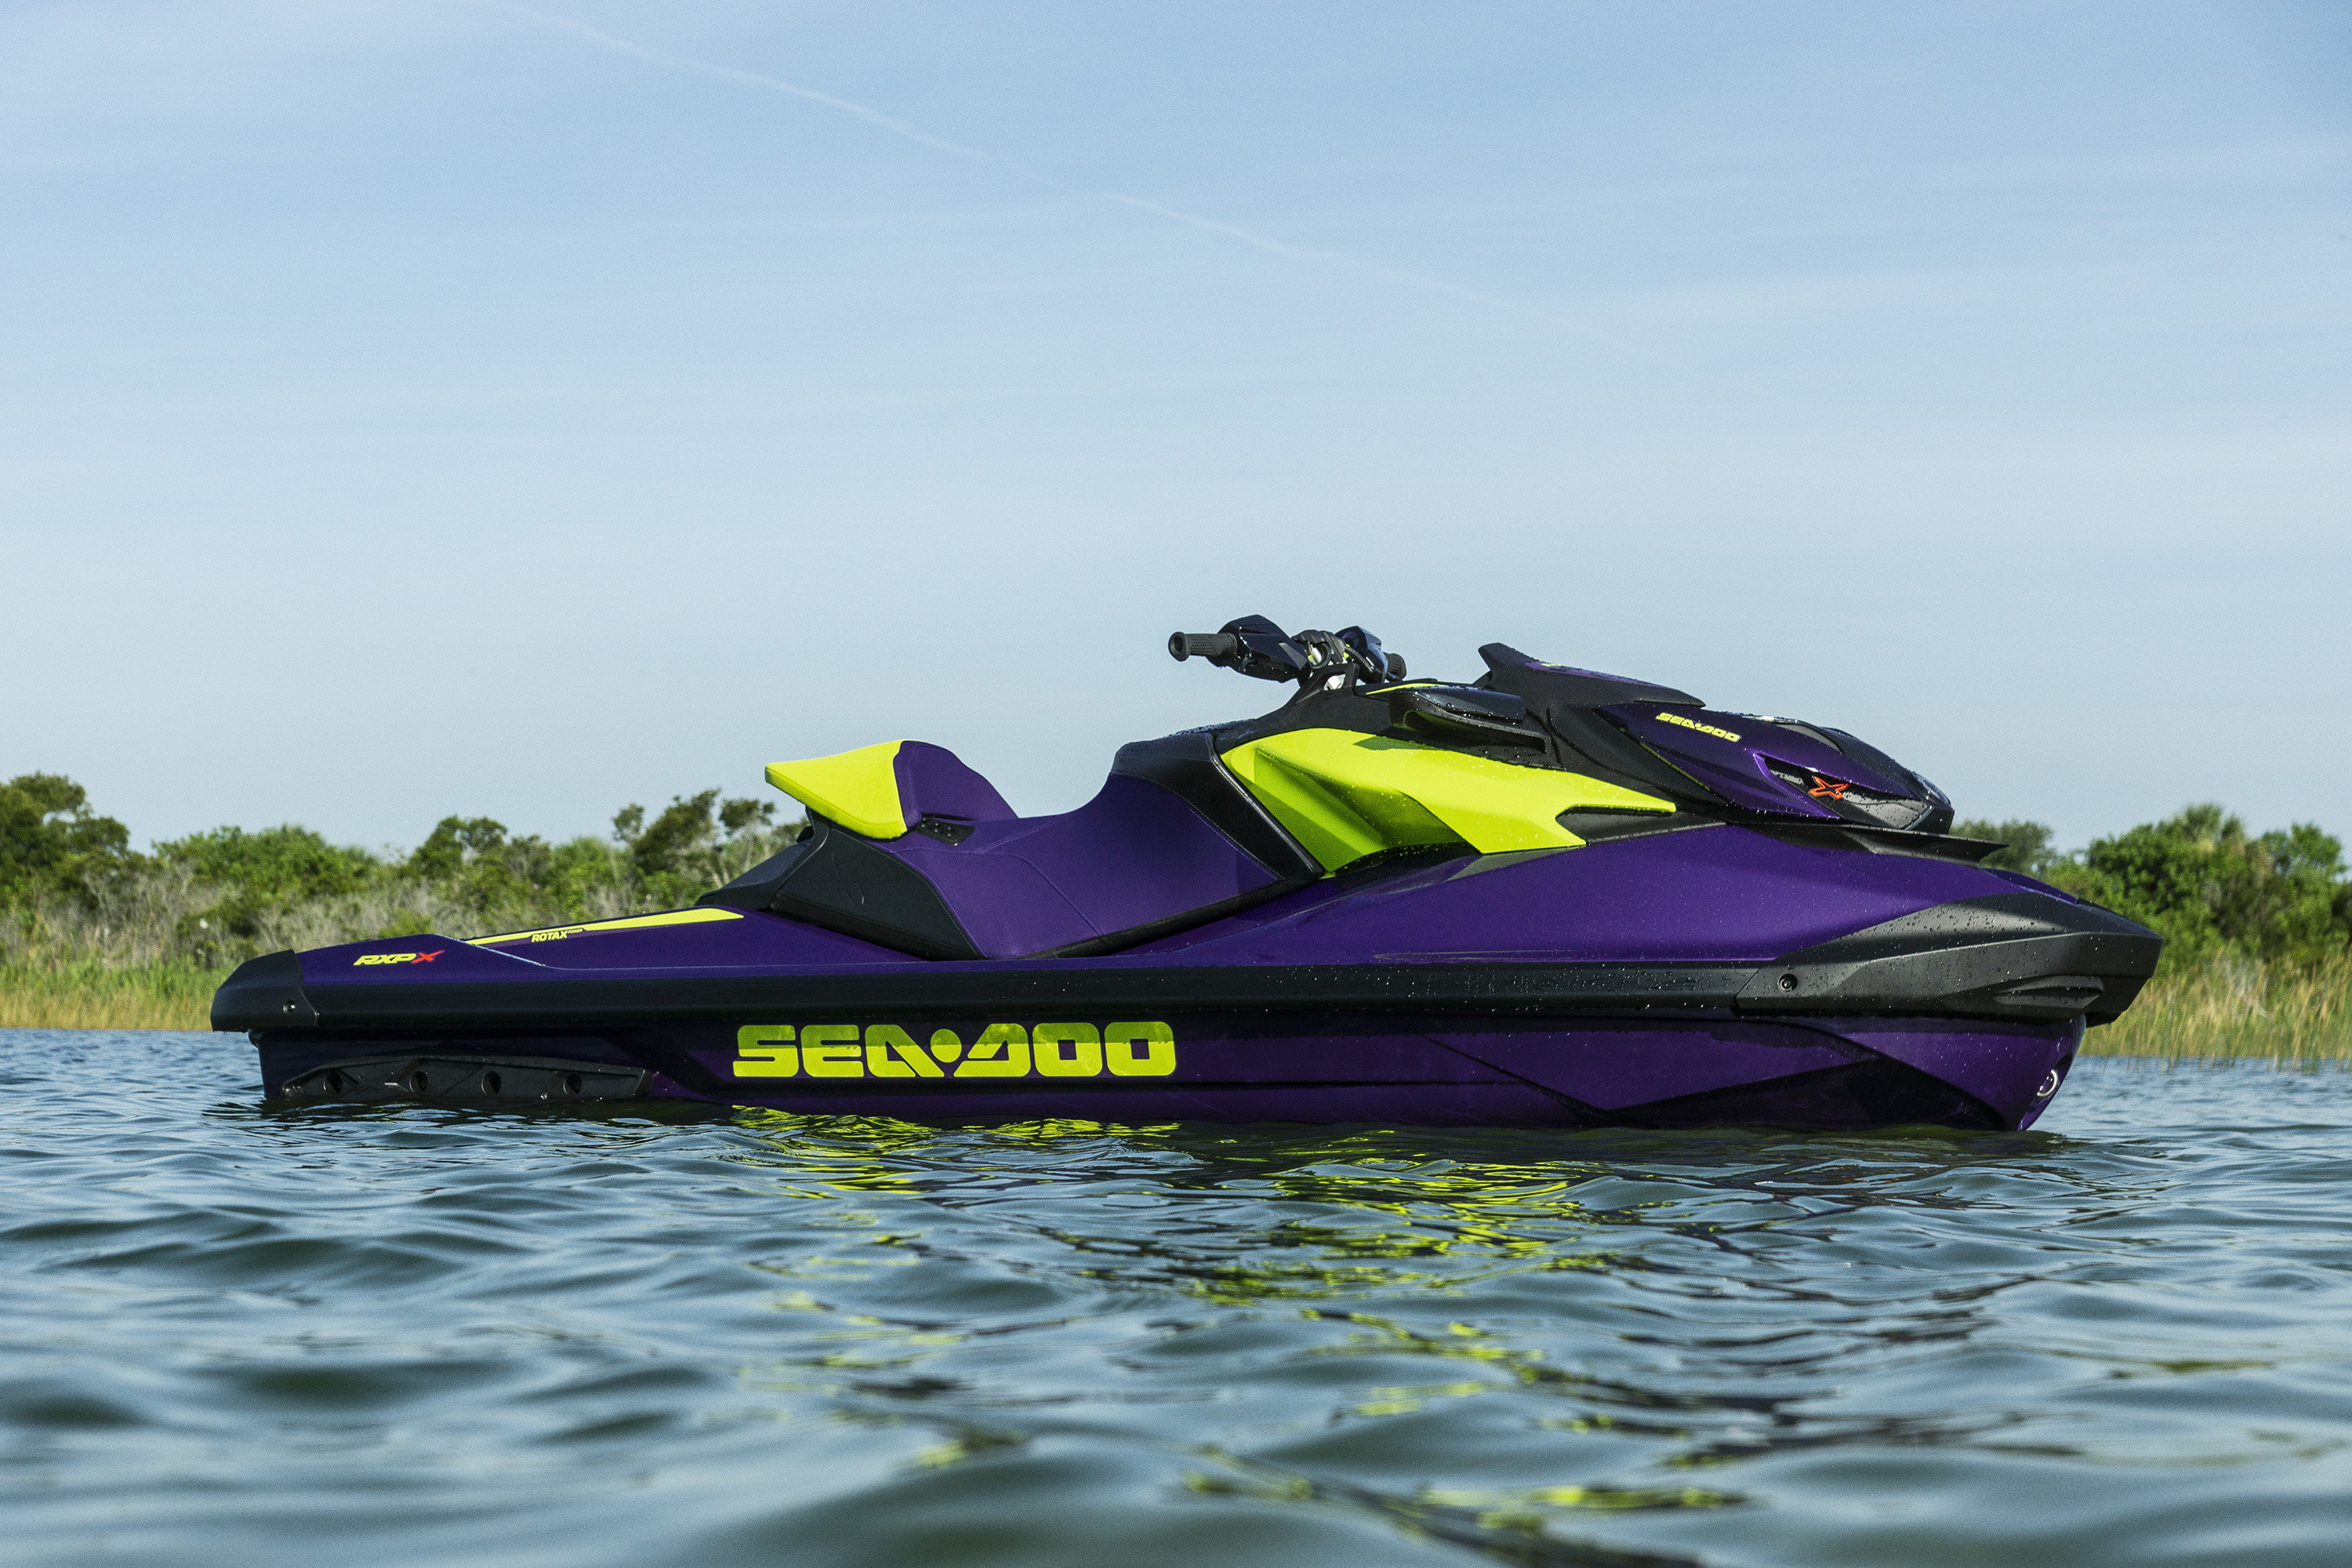 THE SEA-DOO RXP-X RS 300 HAS WON THE 2021 WATERCRAFT OF THE YEAR!